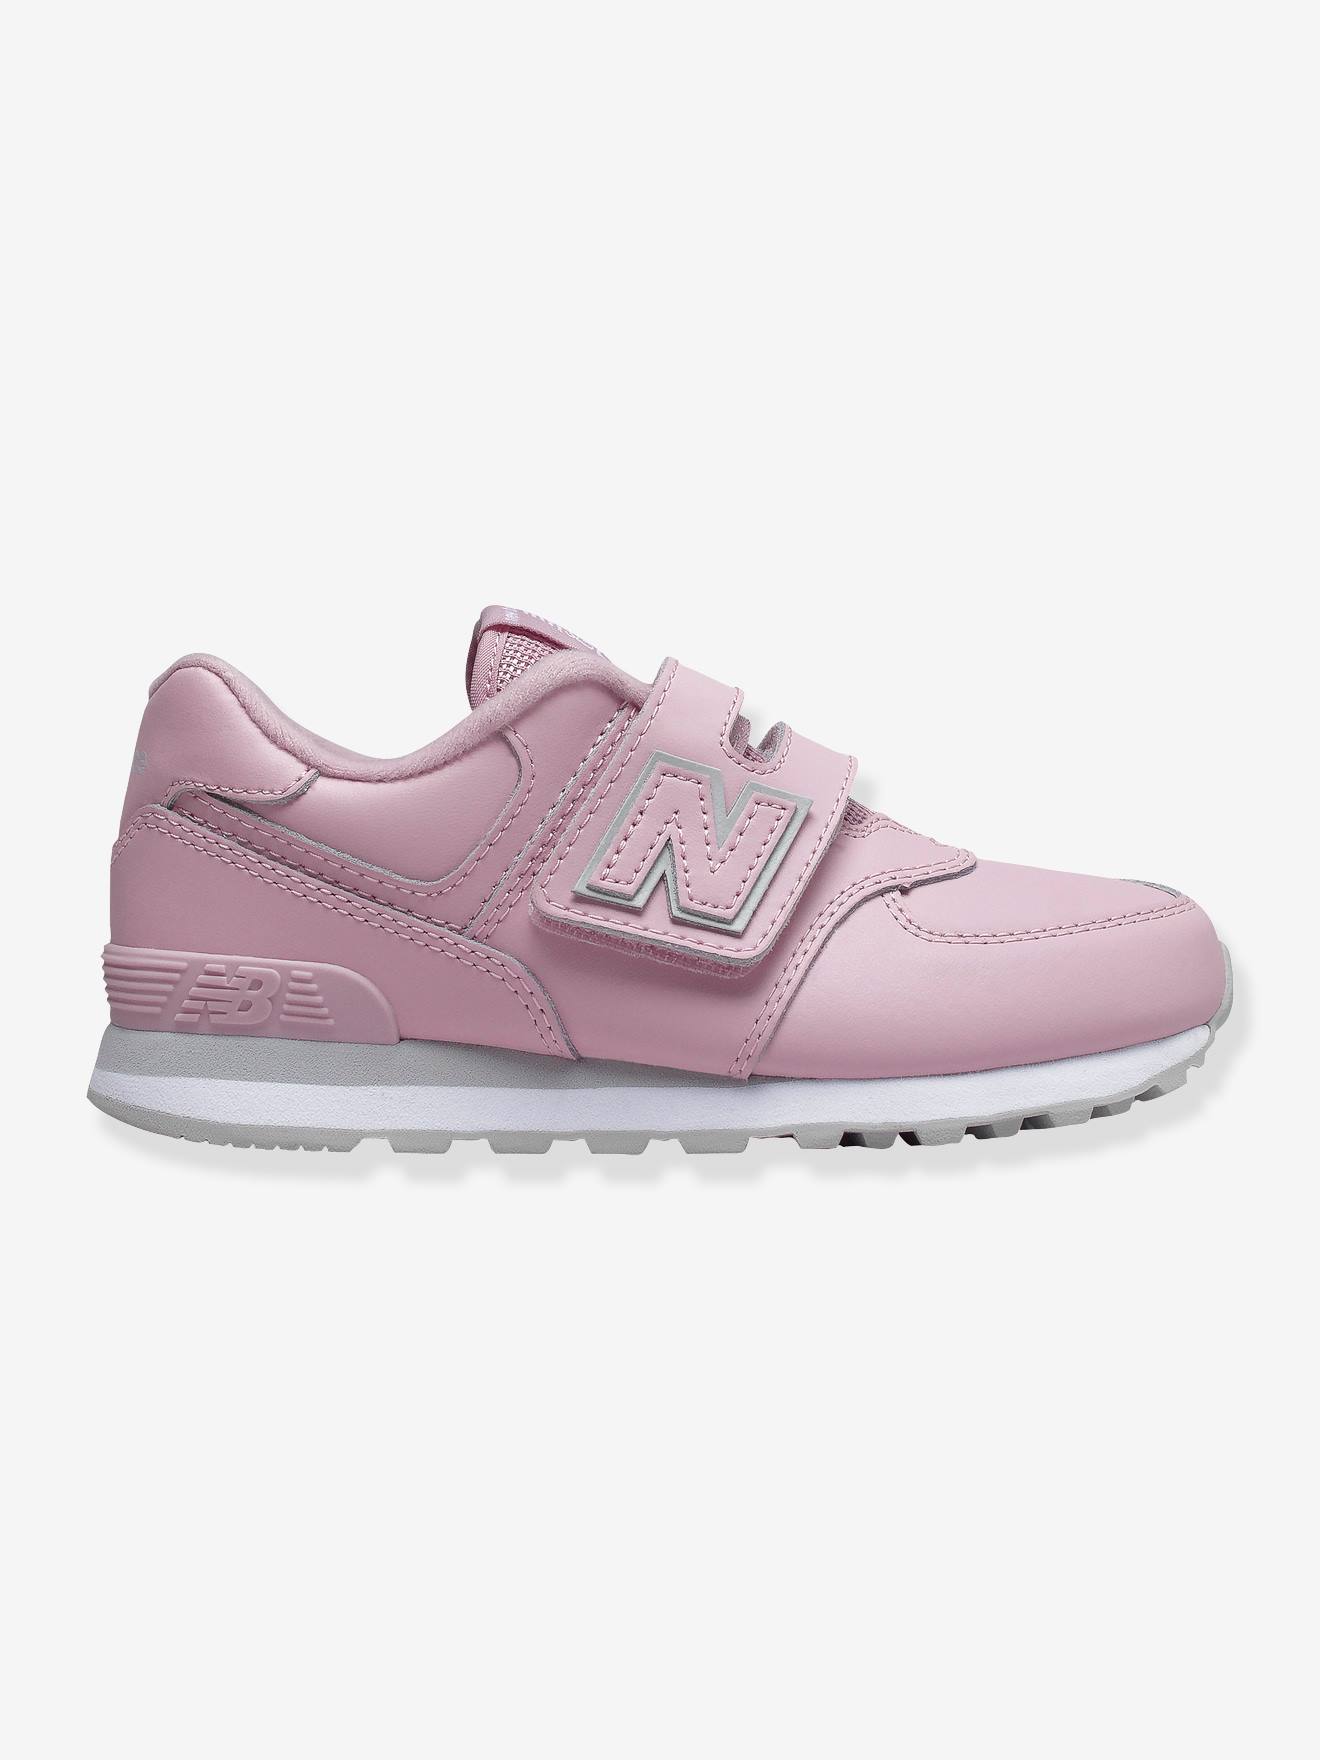 new balance rose fille, OFF 74%,Cheap price !